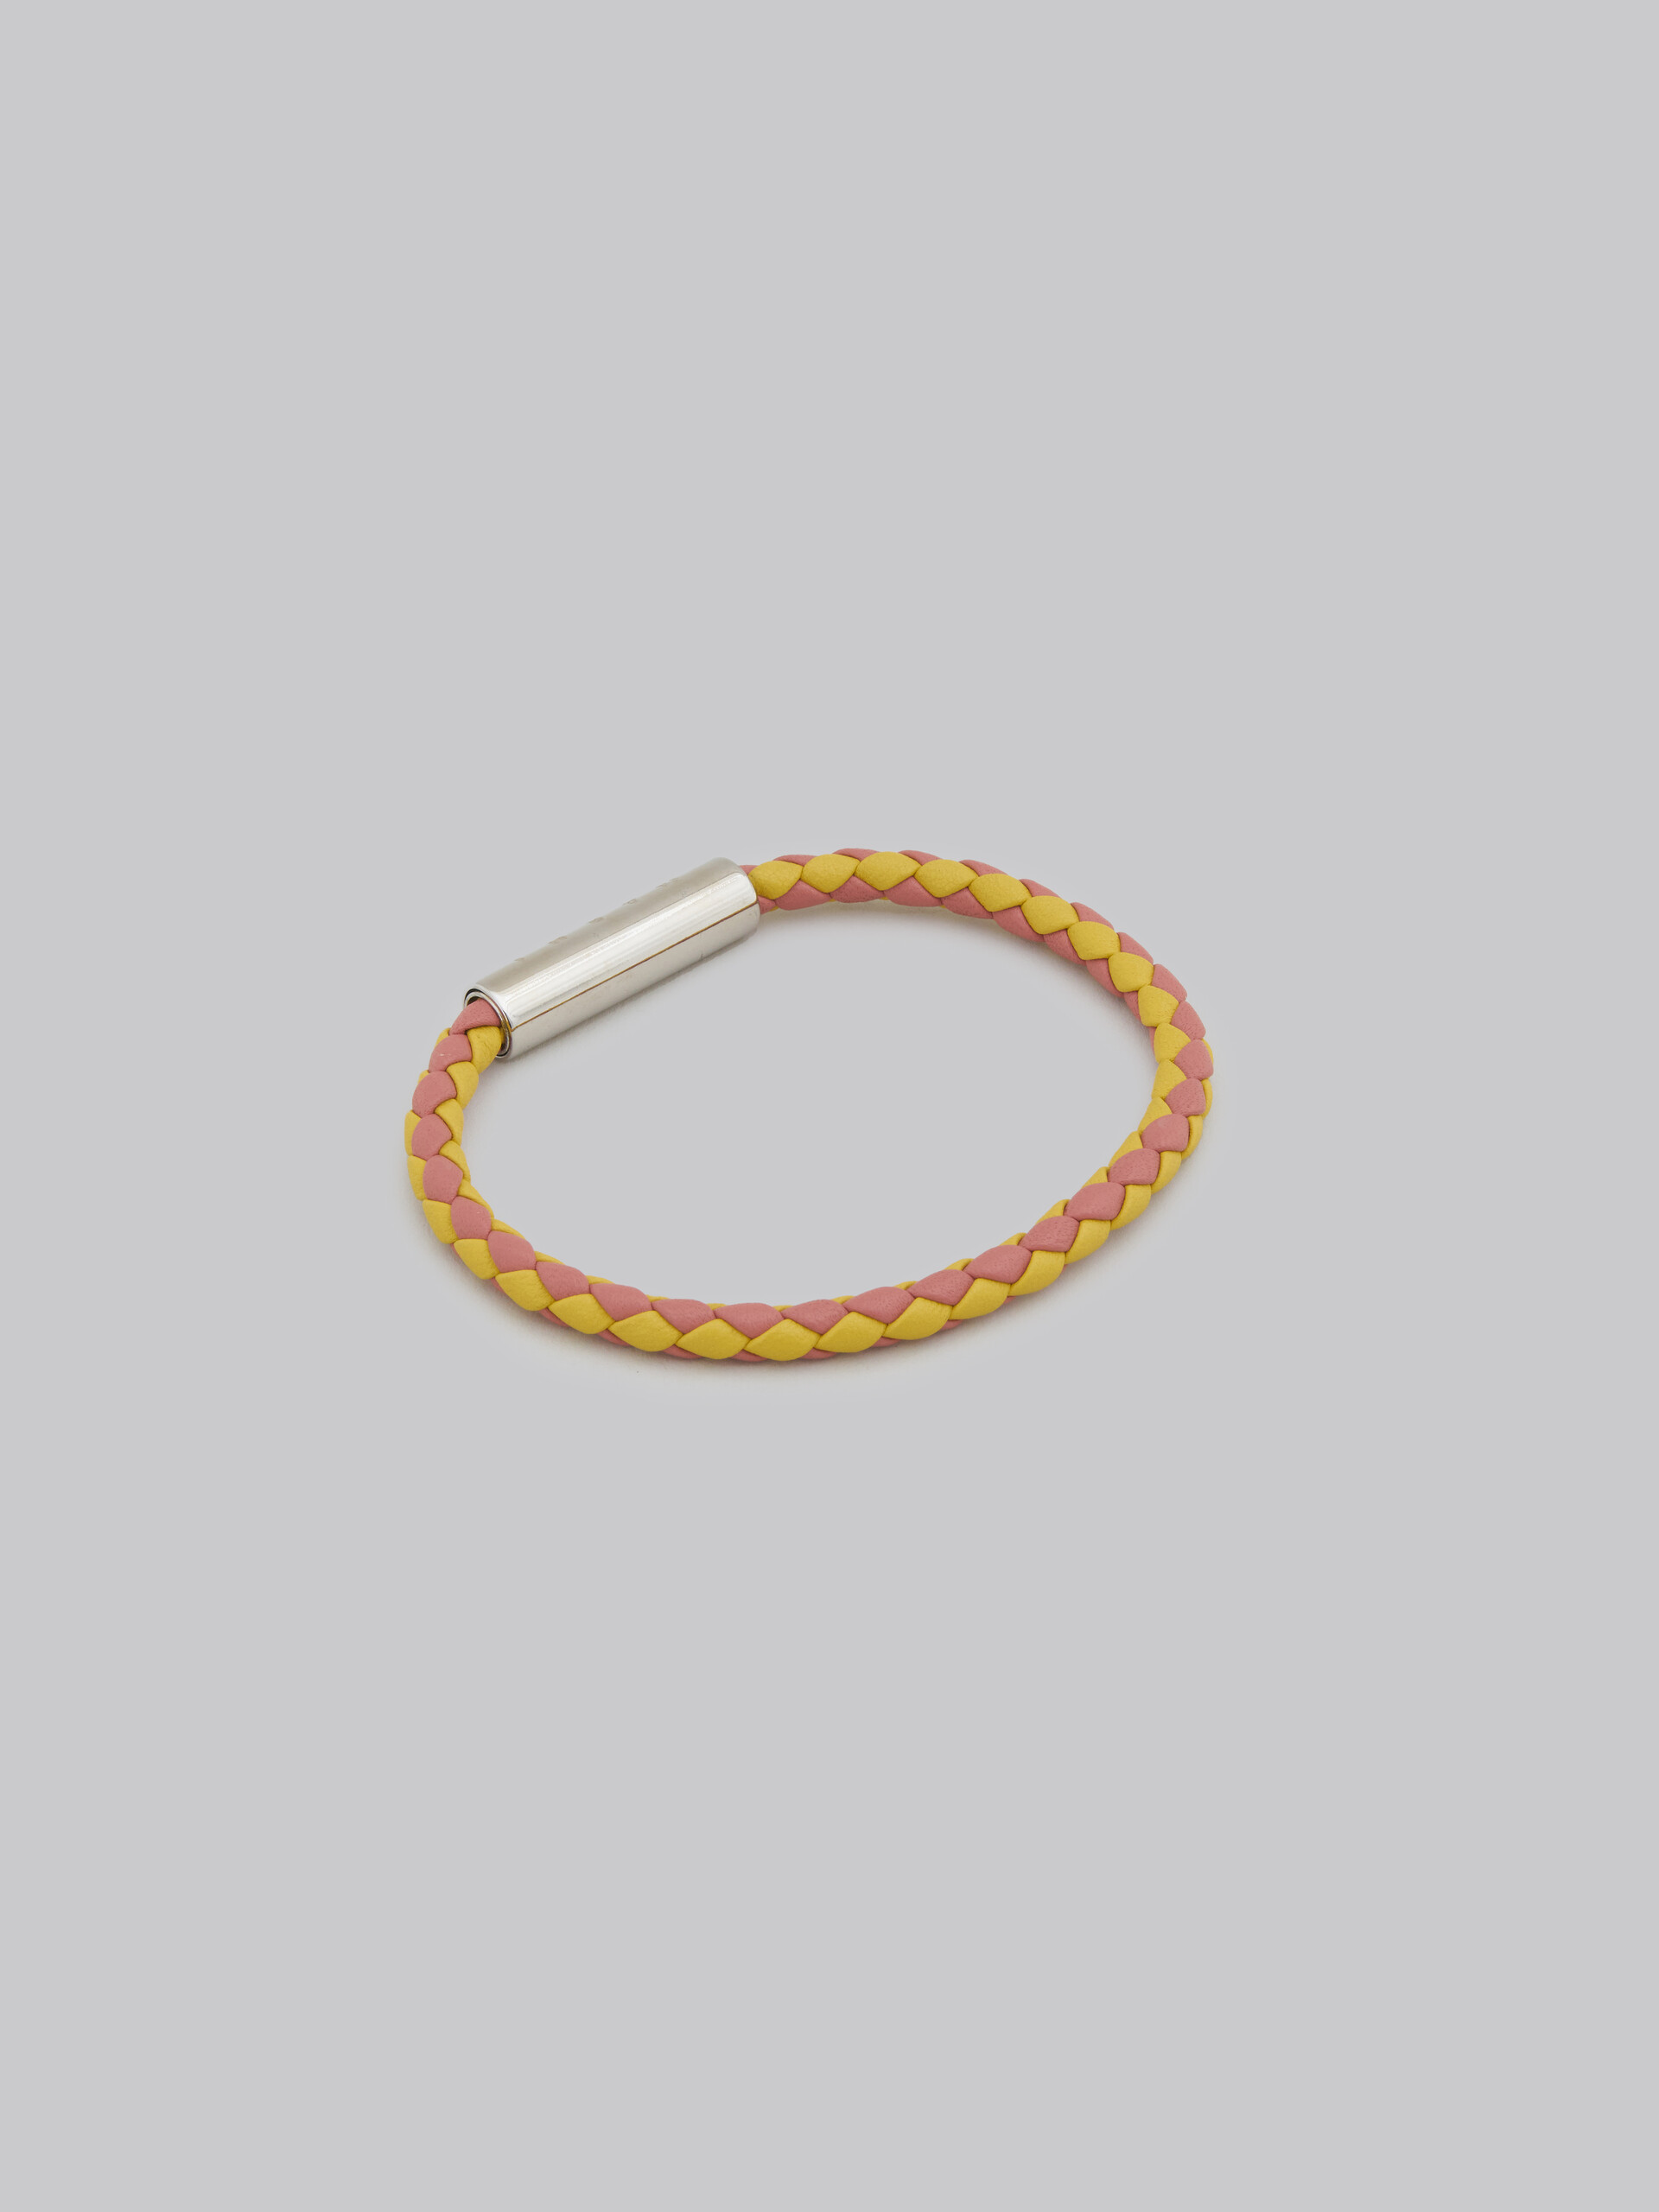 Yellow and pink woven leather bracelet - Bracelets - Image 3